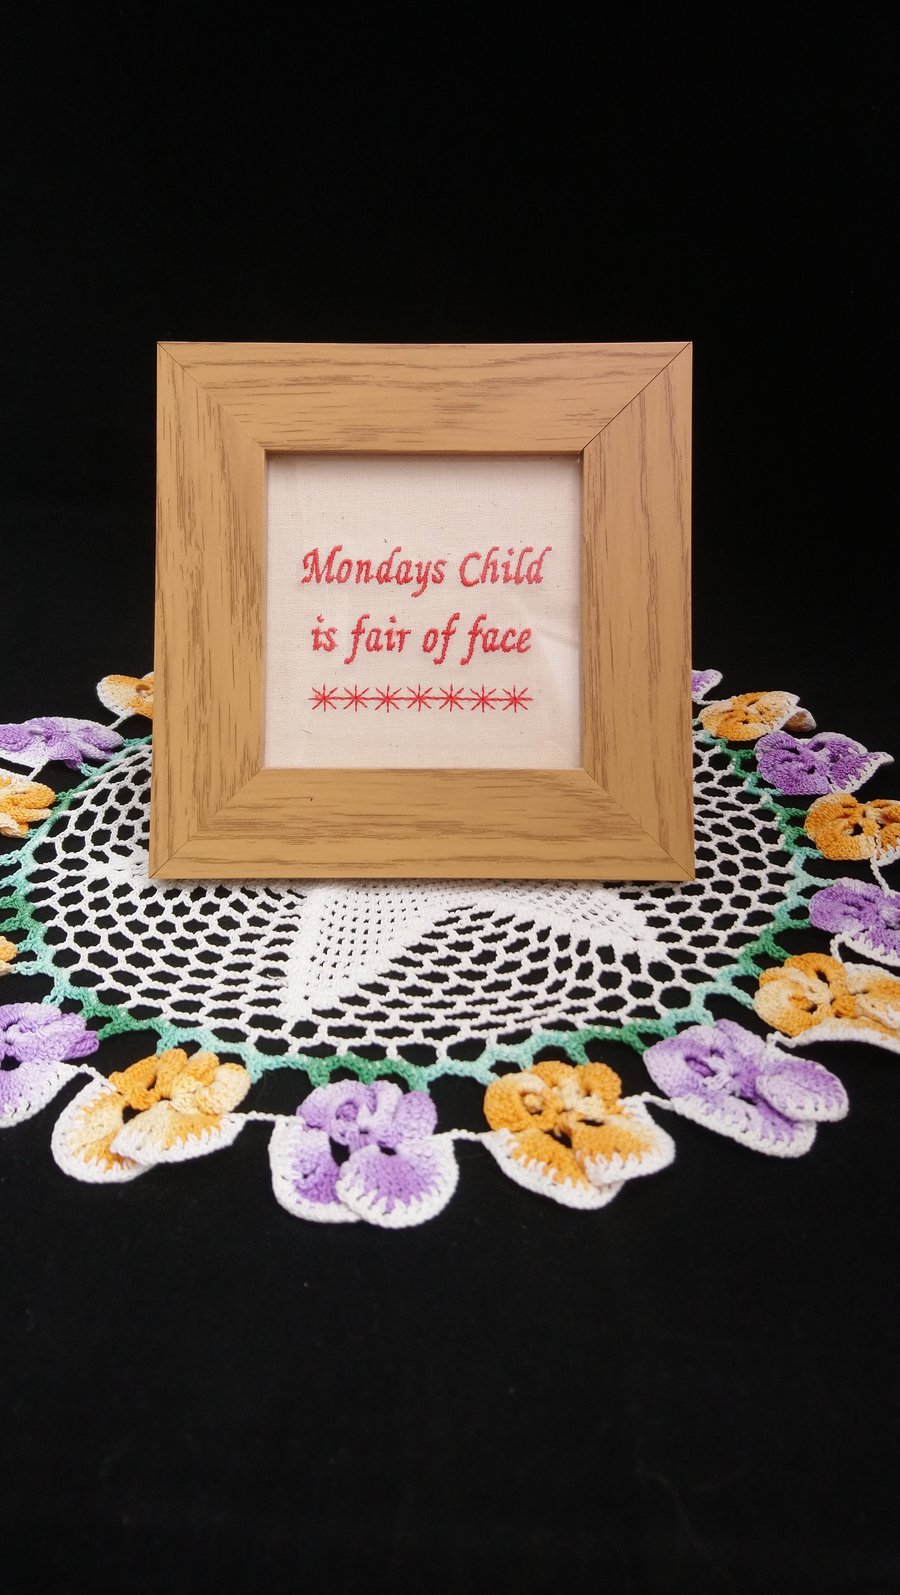 Nursery Rhyme Mondays Child Embroidery in a Frame